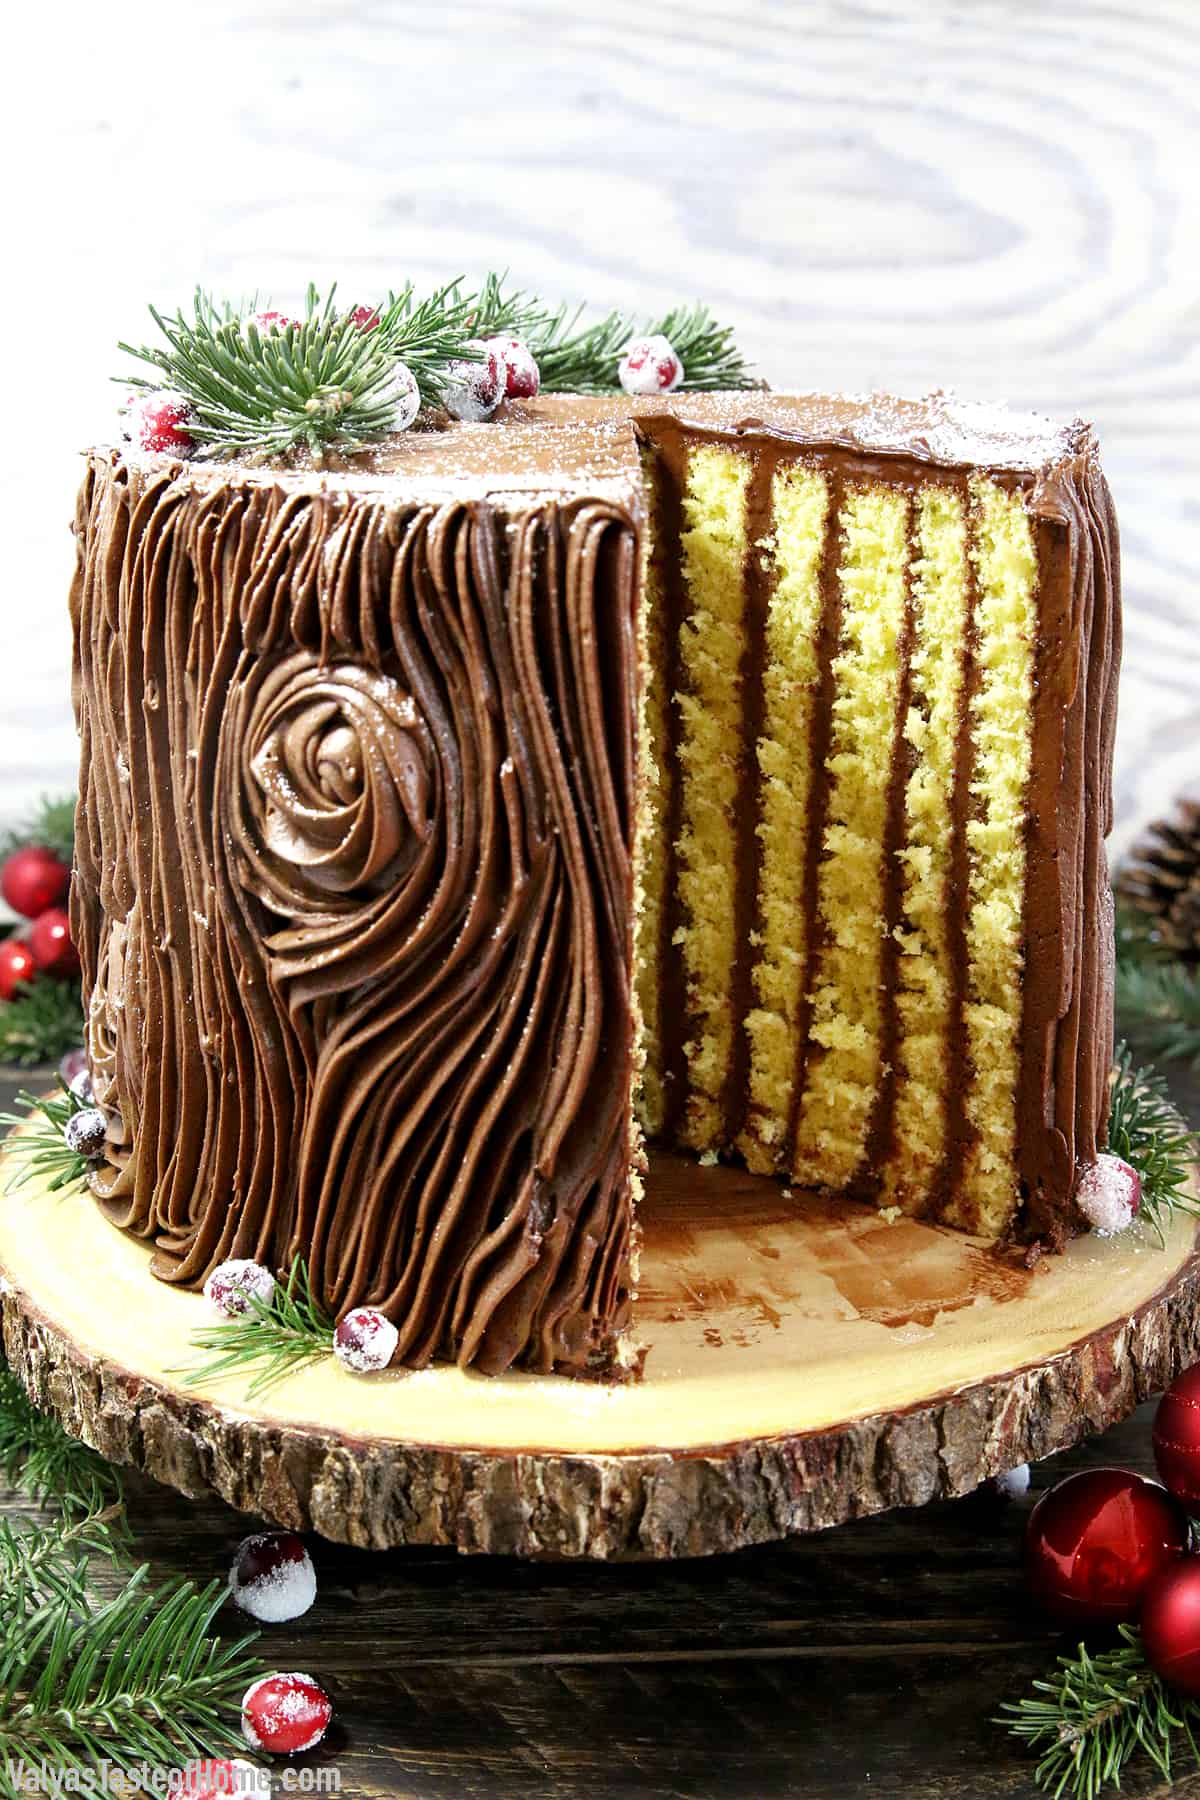 Tree Stump Cake 14 When I think about trees around Christmastime, this is what comes to mind (instead of a messy out-of-place forest dweller): The Best Tree Stump Cake dessert, with its irresistible chocolate buttercream frosting and the beauty of a true show stopper. It's perfect for Christmas, any holiday, or a woodland theme party.